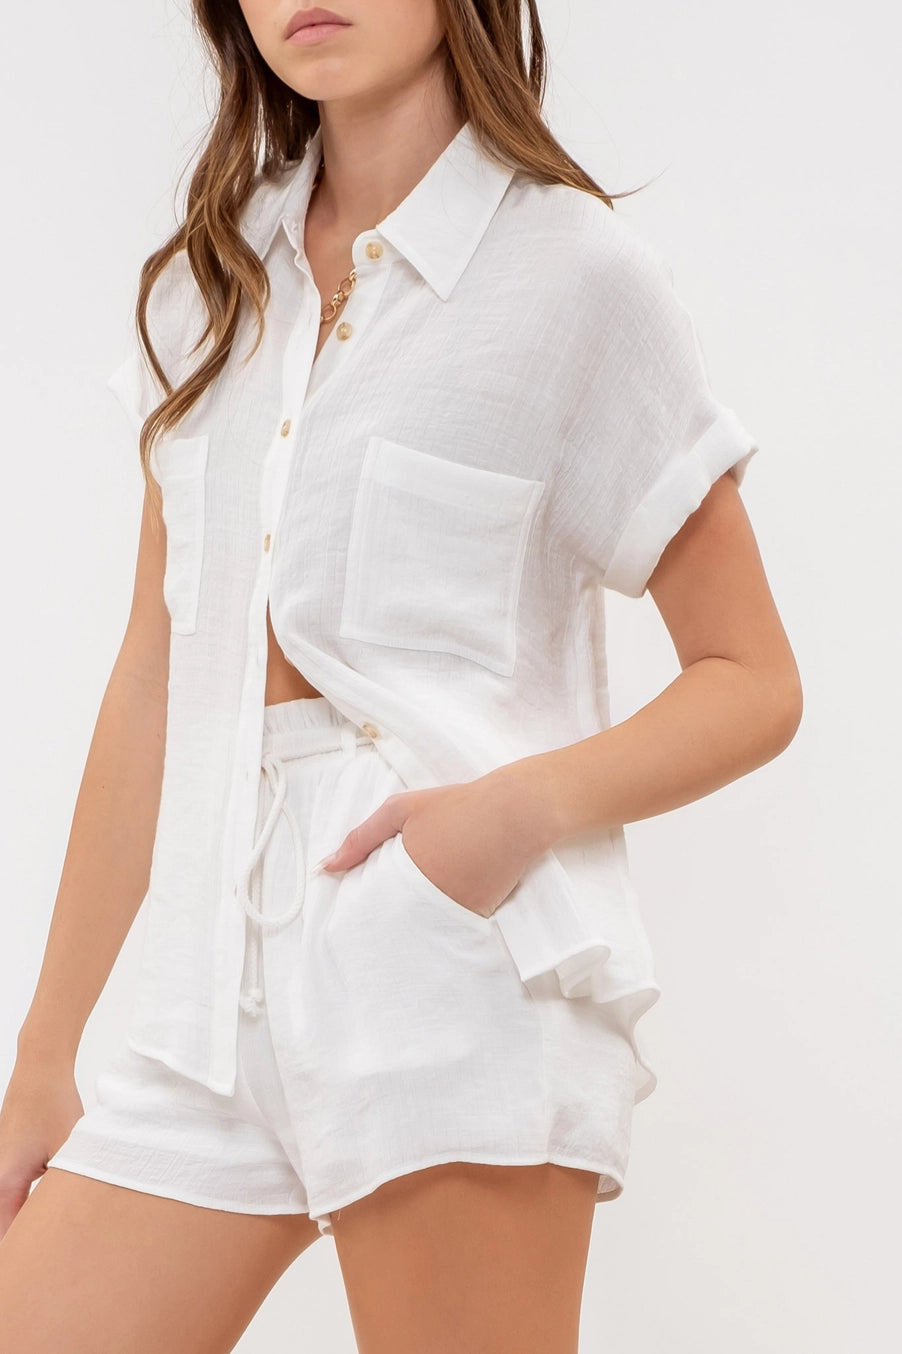 Everly White Blouse - KC Outfitter